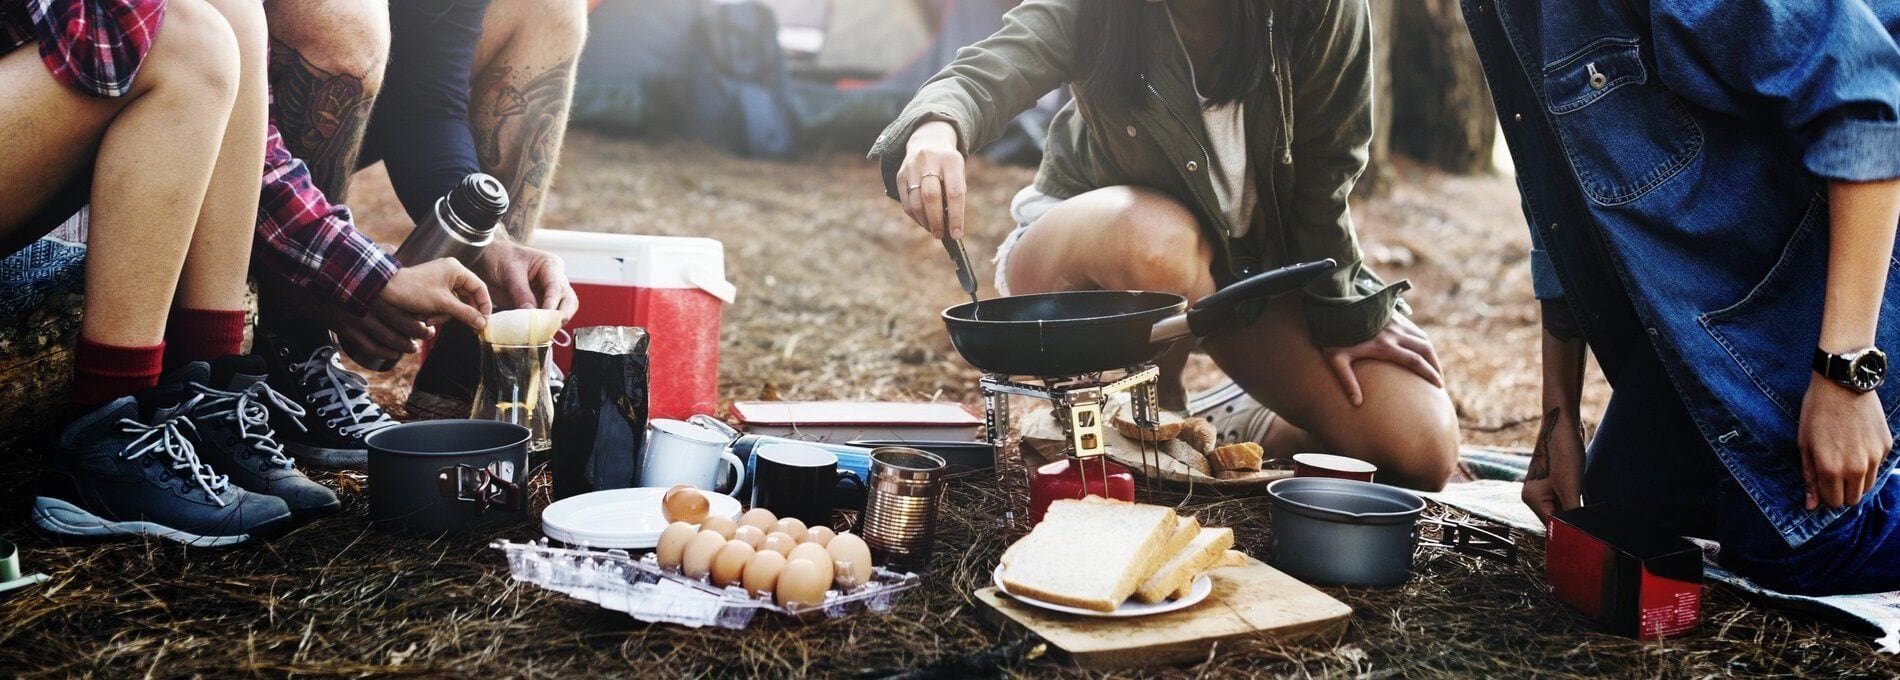 Clever cooking hacks for your next camping trip